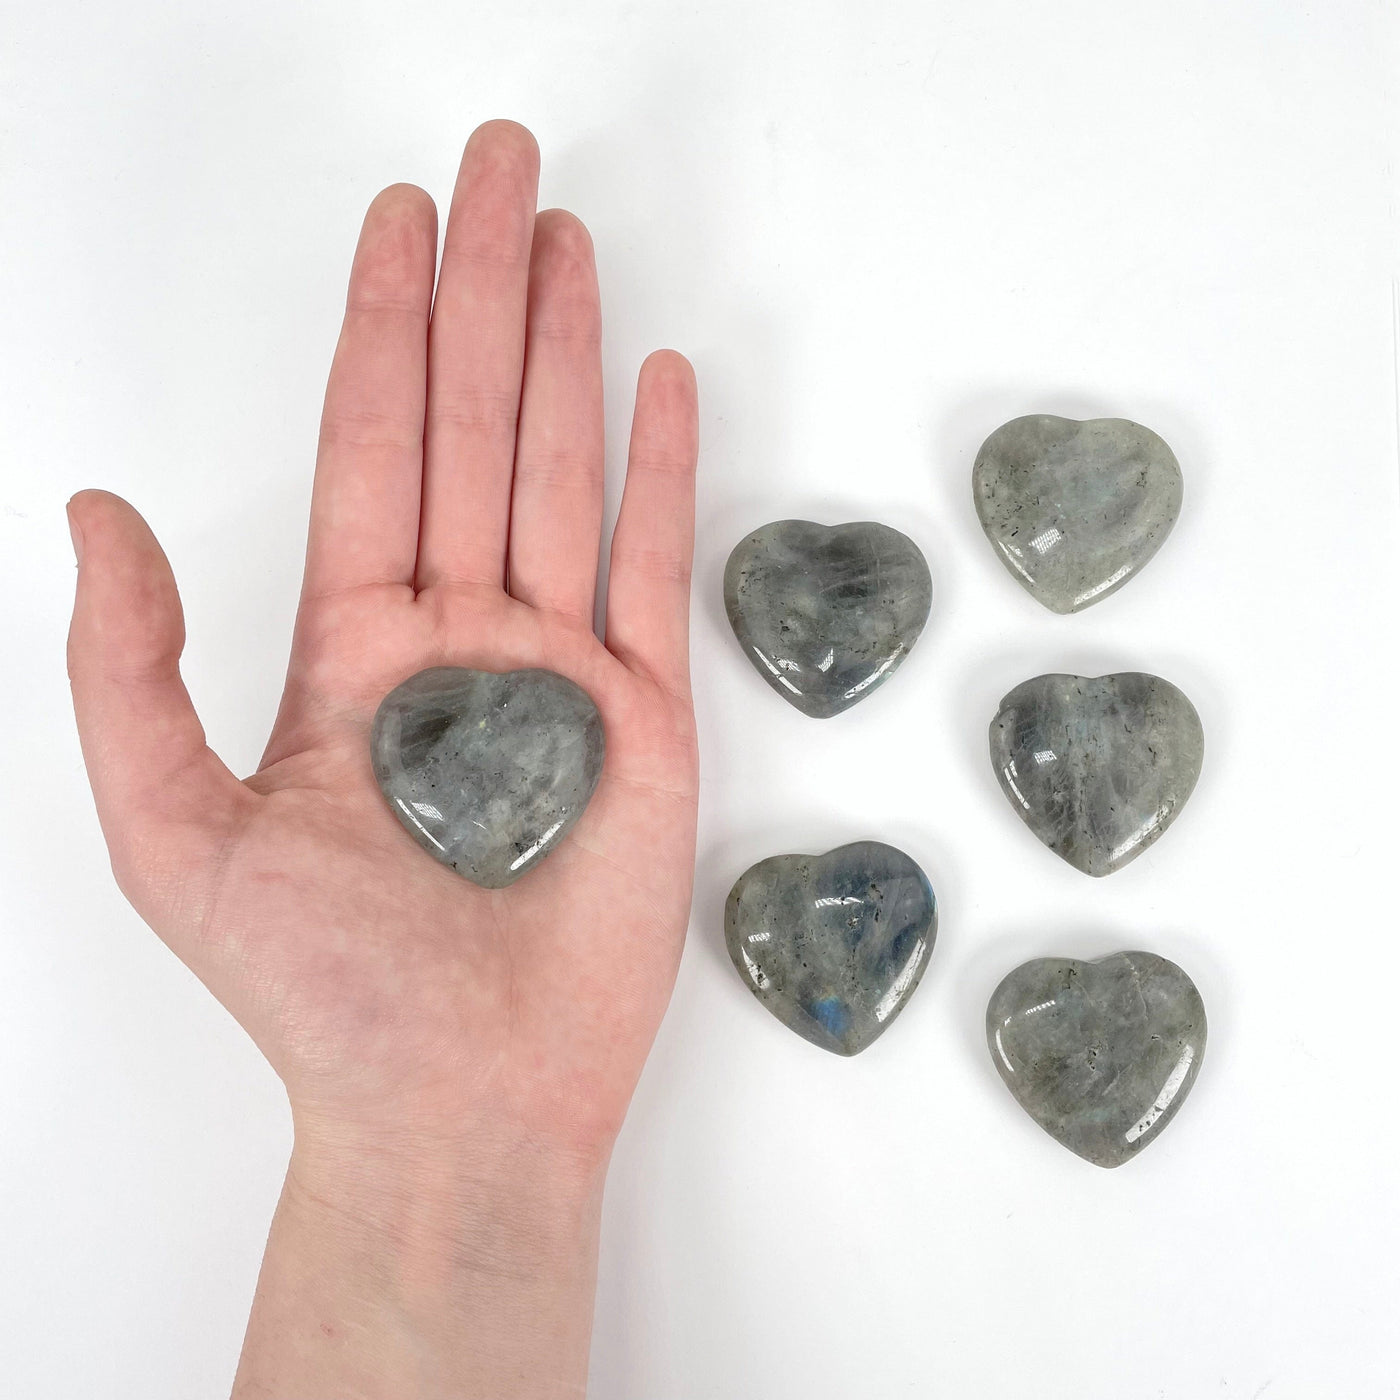 one labradorite polished heart in hand for size reference